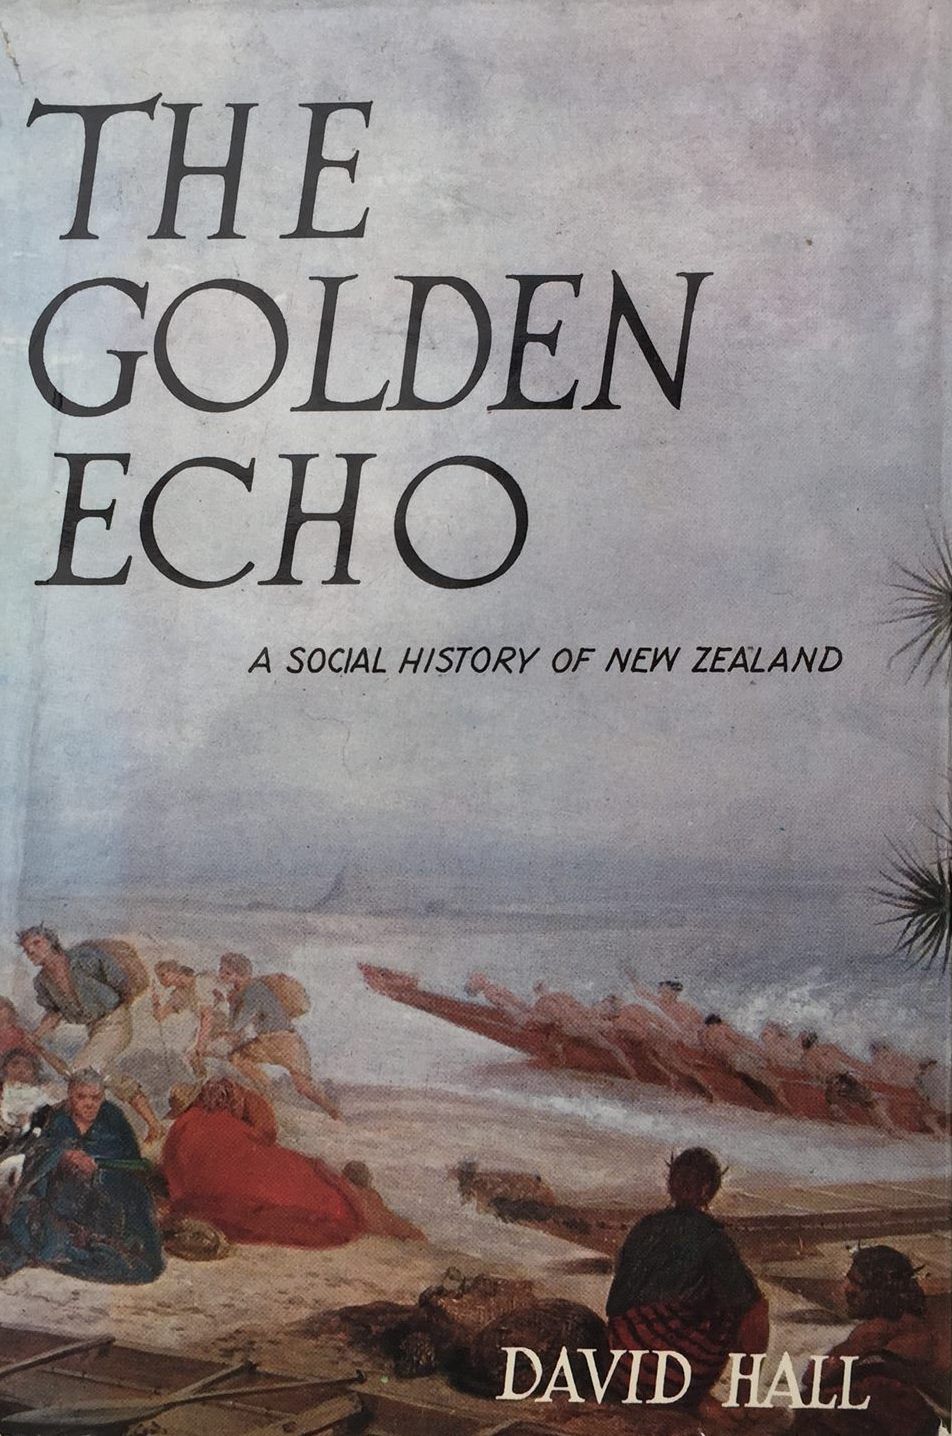 THE GOLDEN ECHO: A Social History of New Zealand